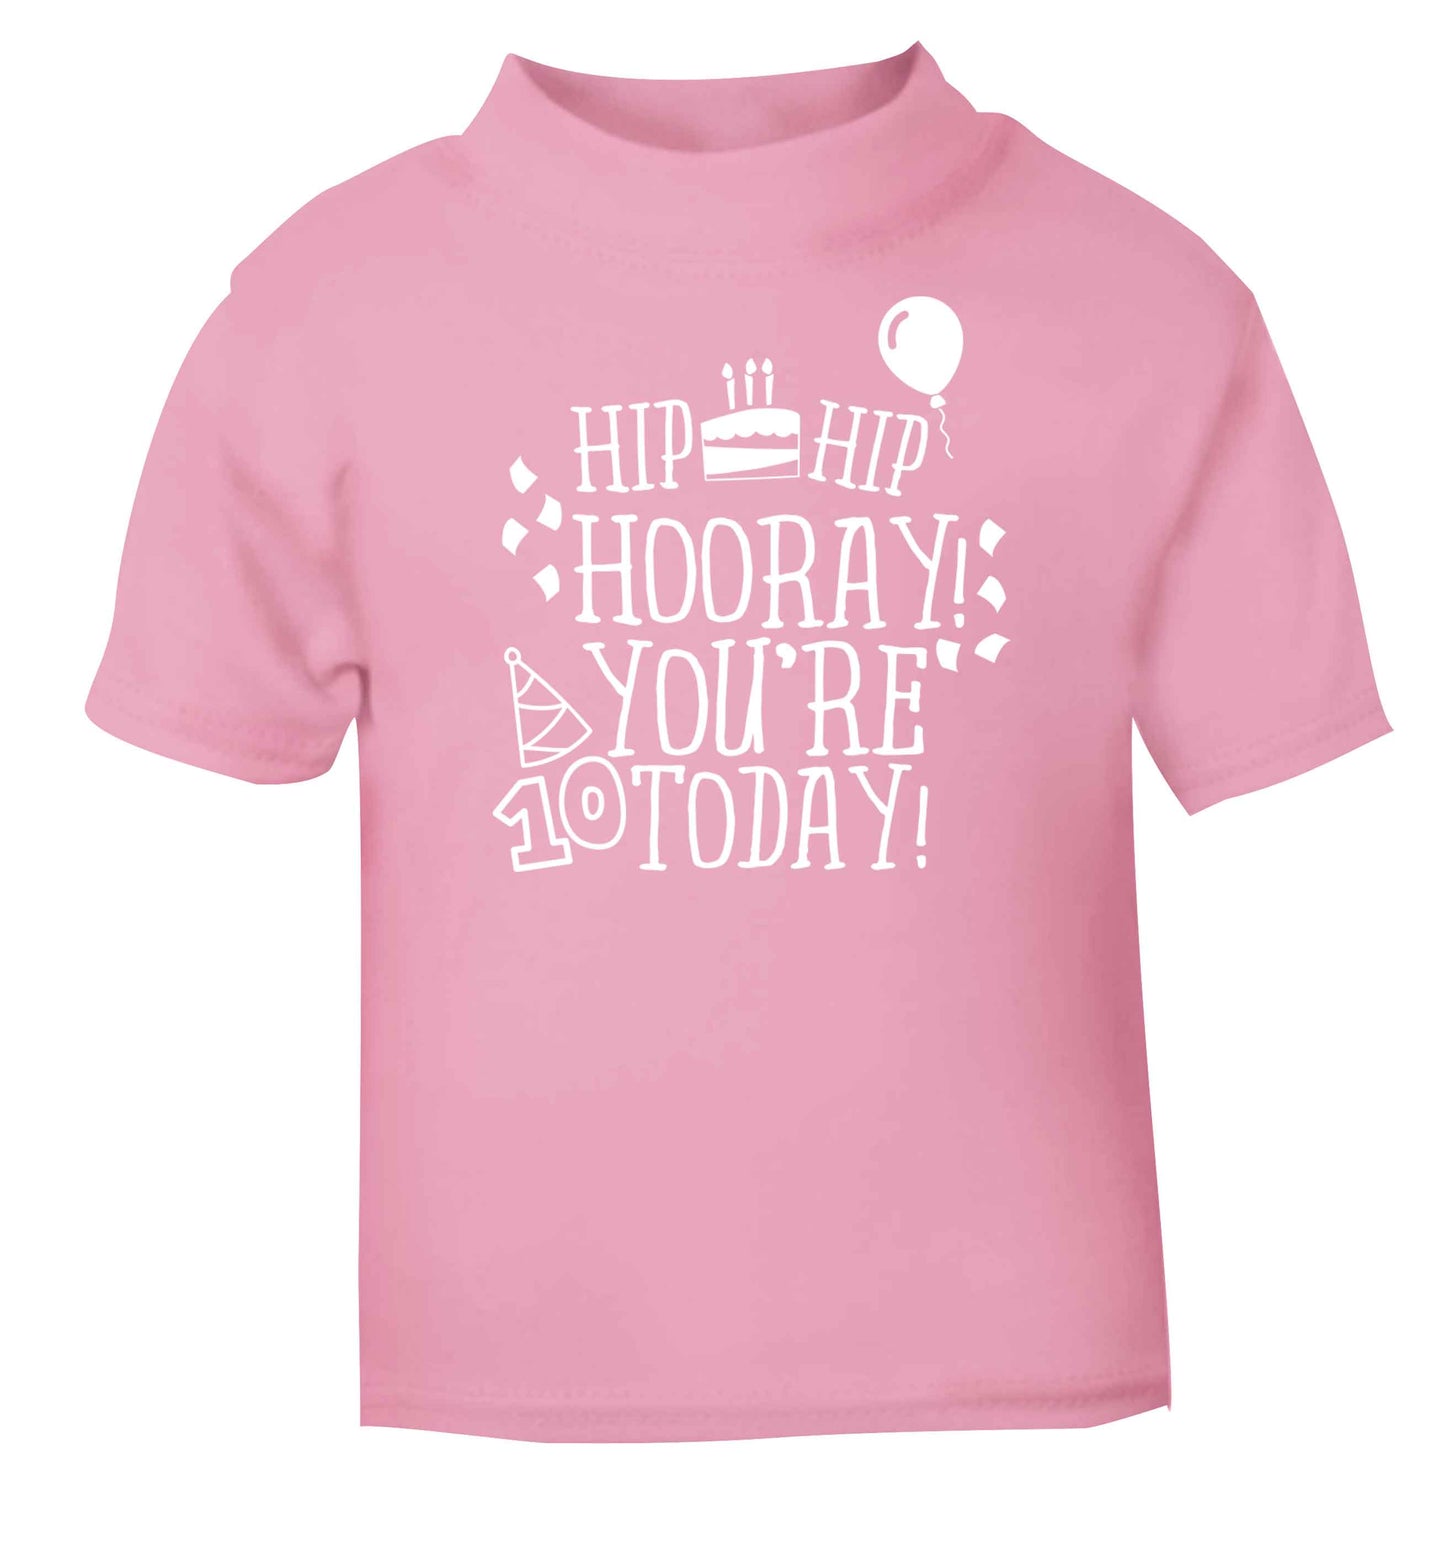 Hip hip hooray you're ten today! light pink baby toddler Tshirt 2 Years